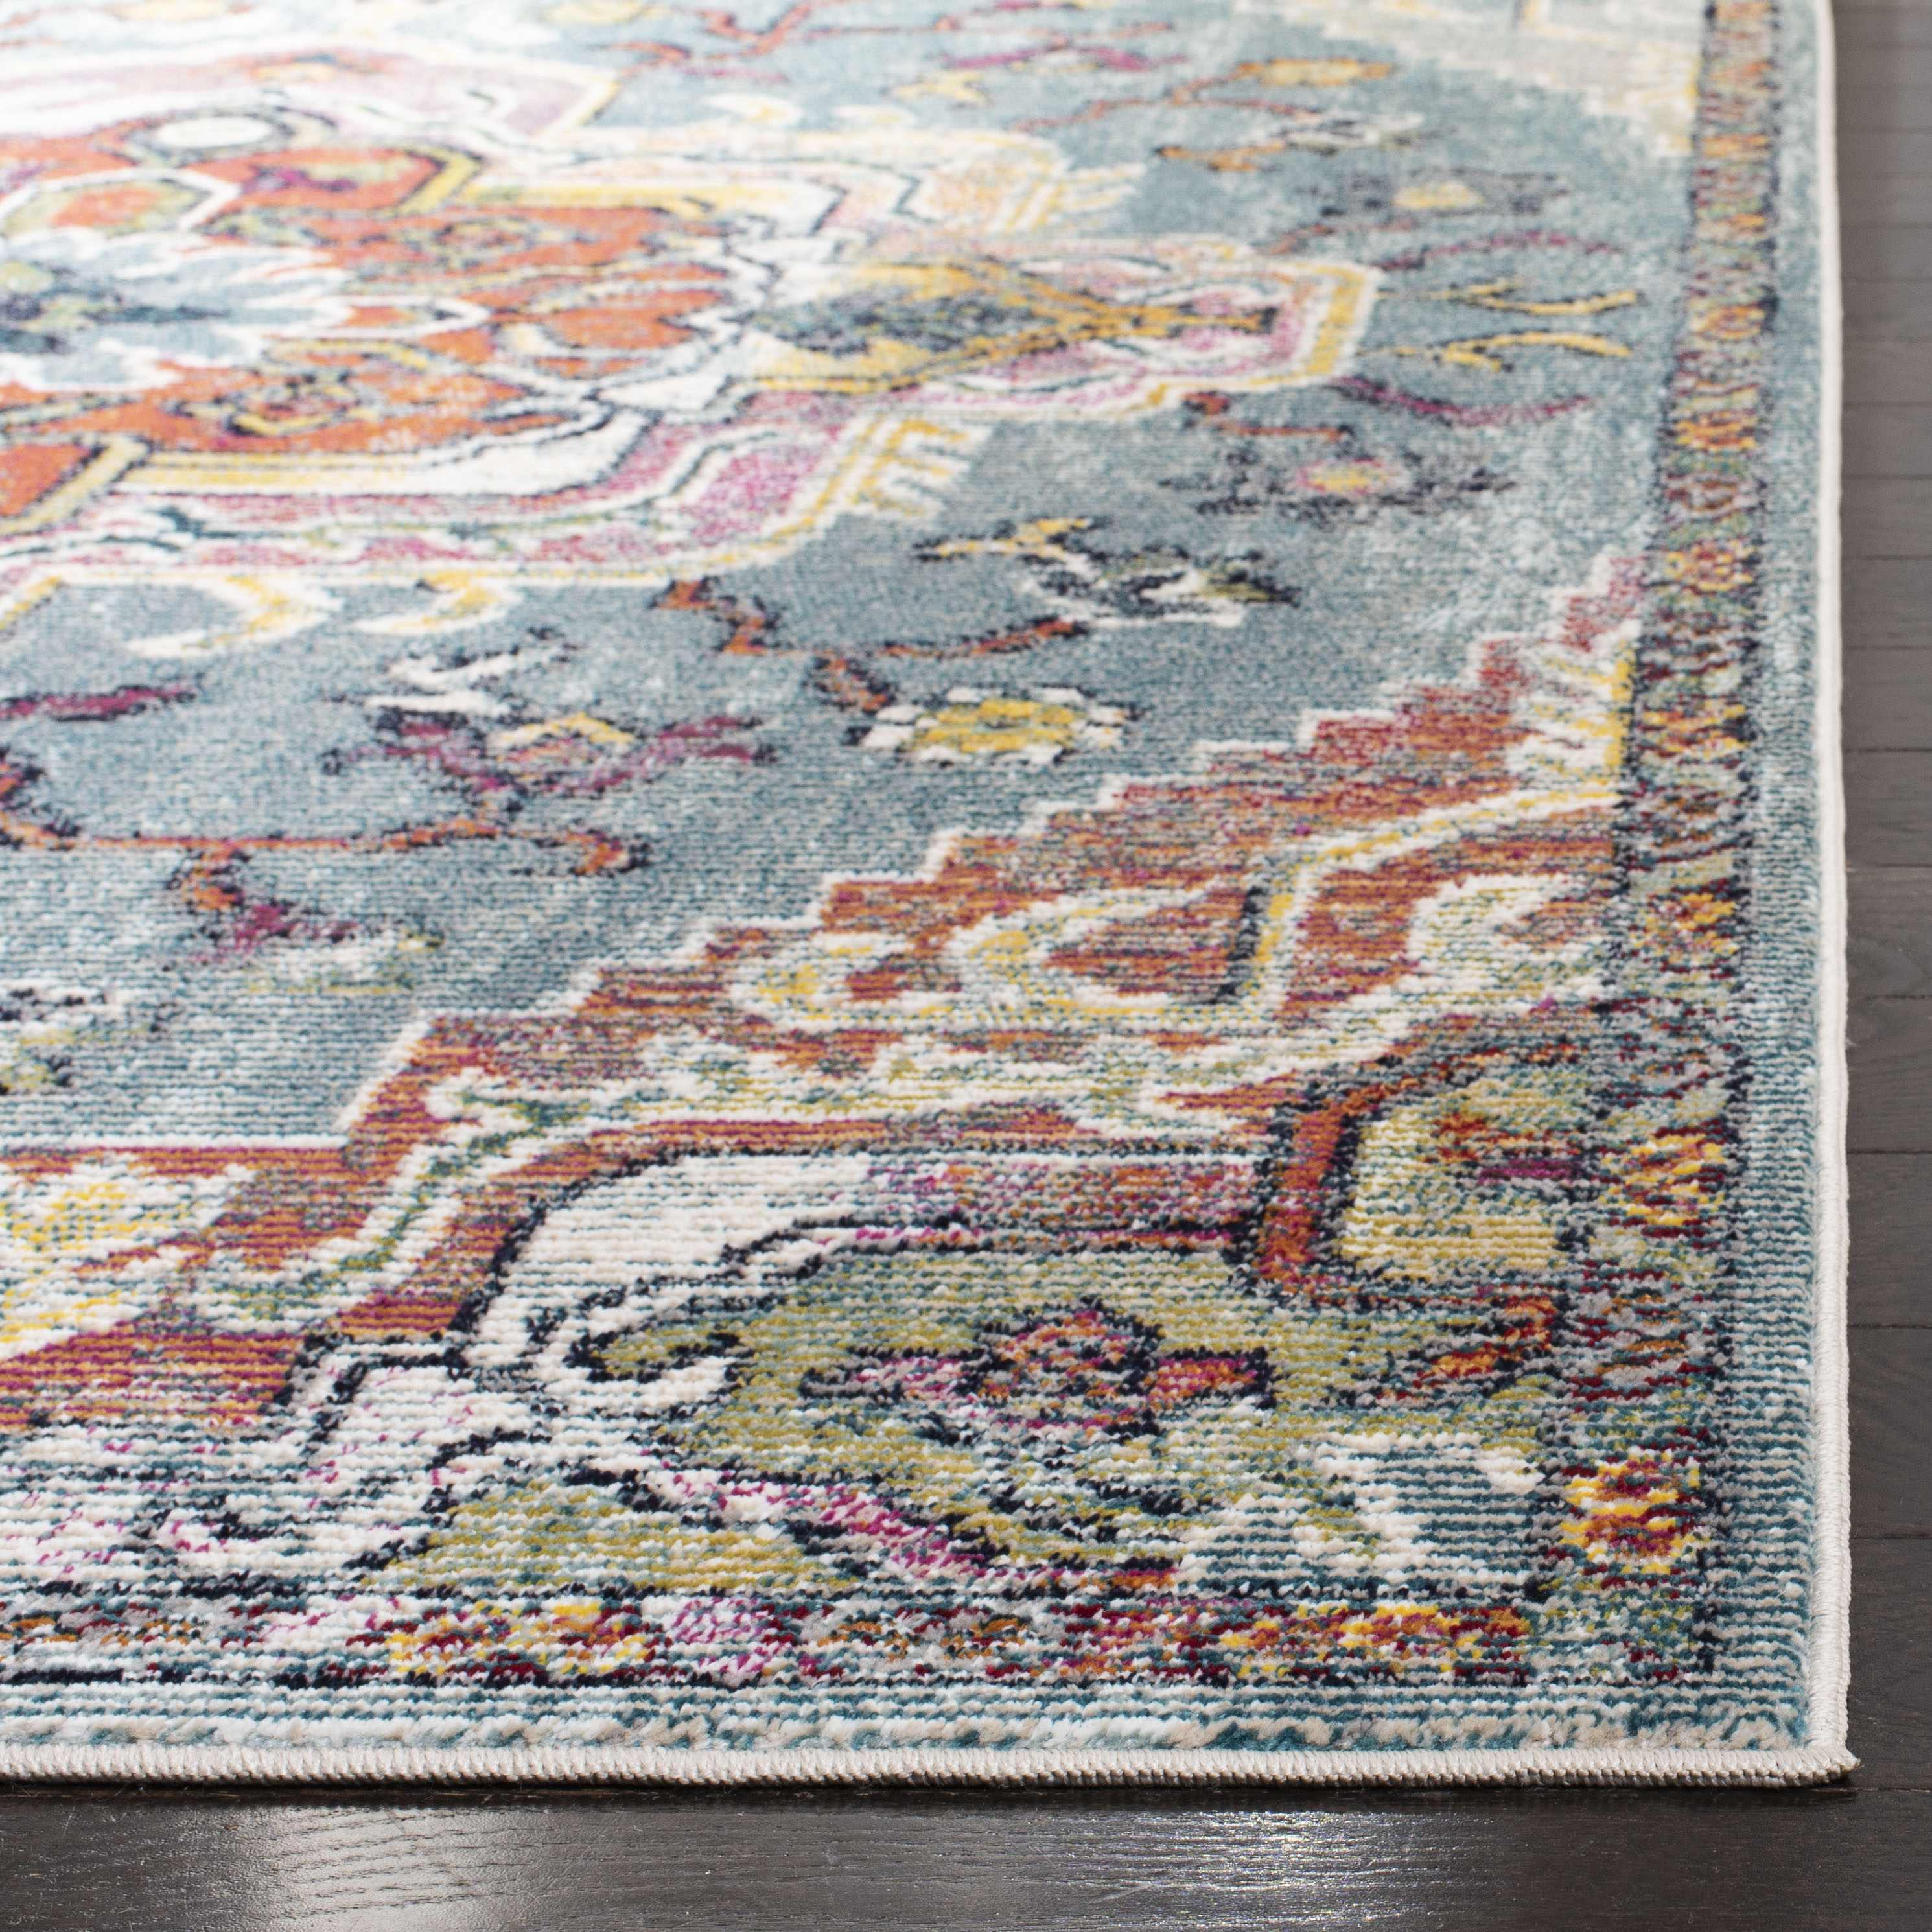 Safavieh Crystal 5' x 8' Rug in Teal and Red - image 3 of 9